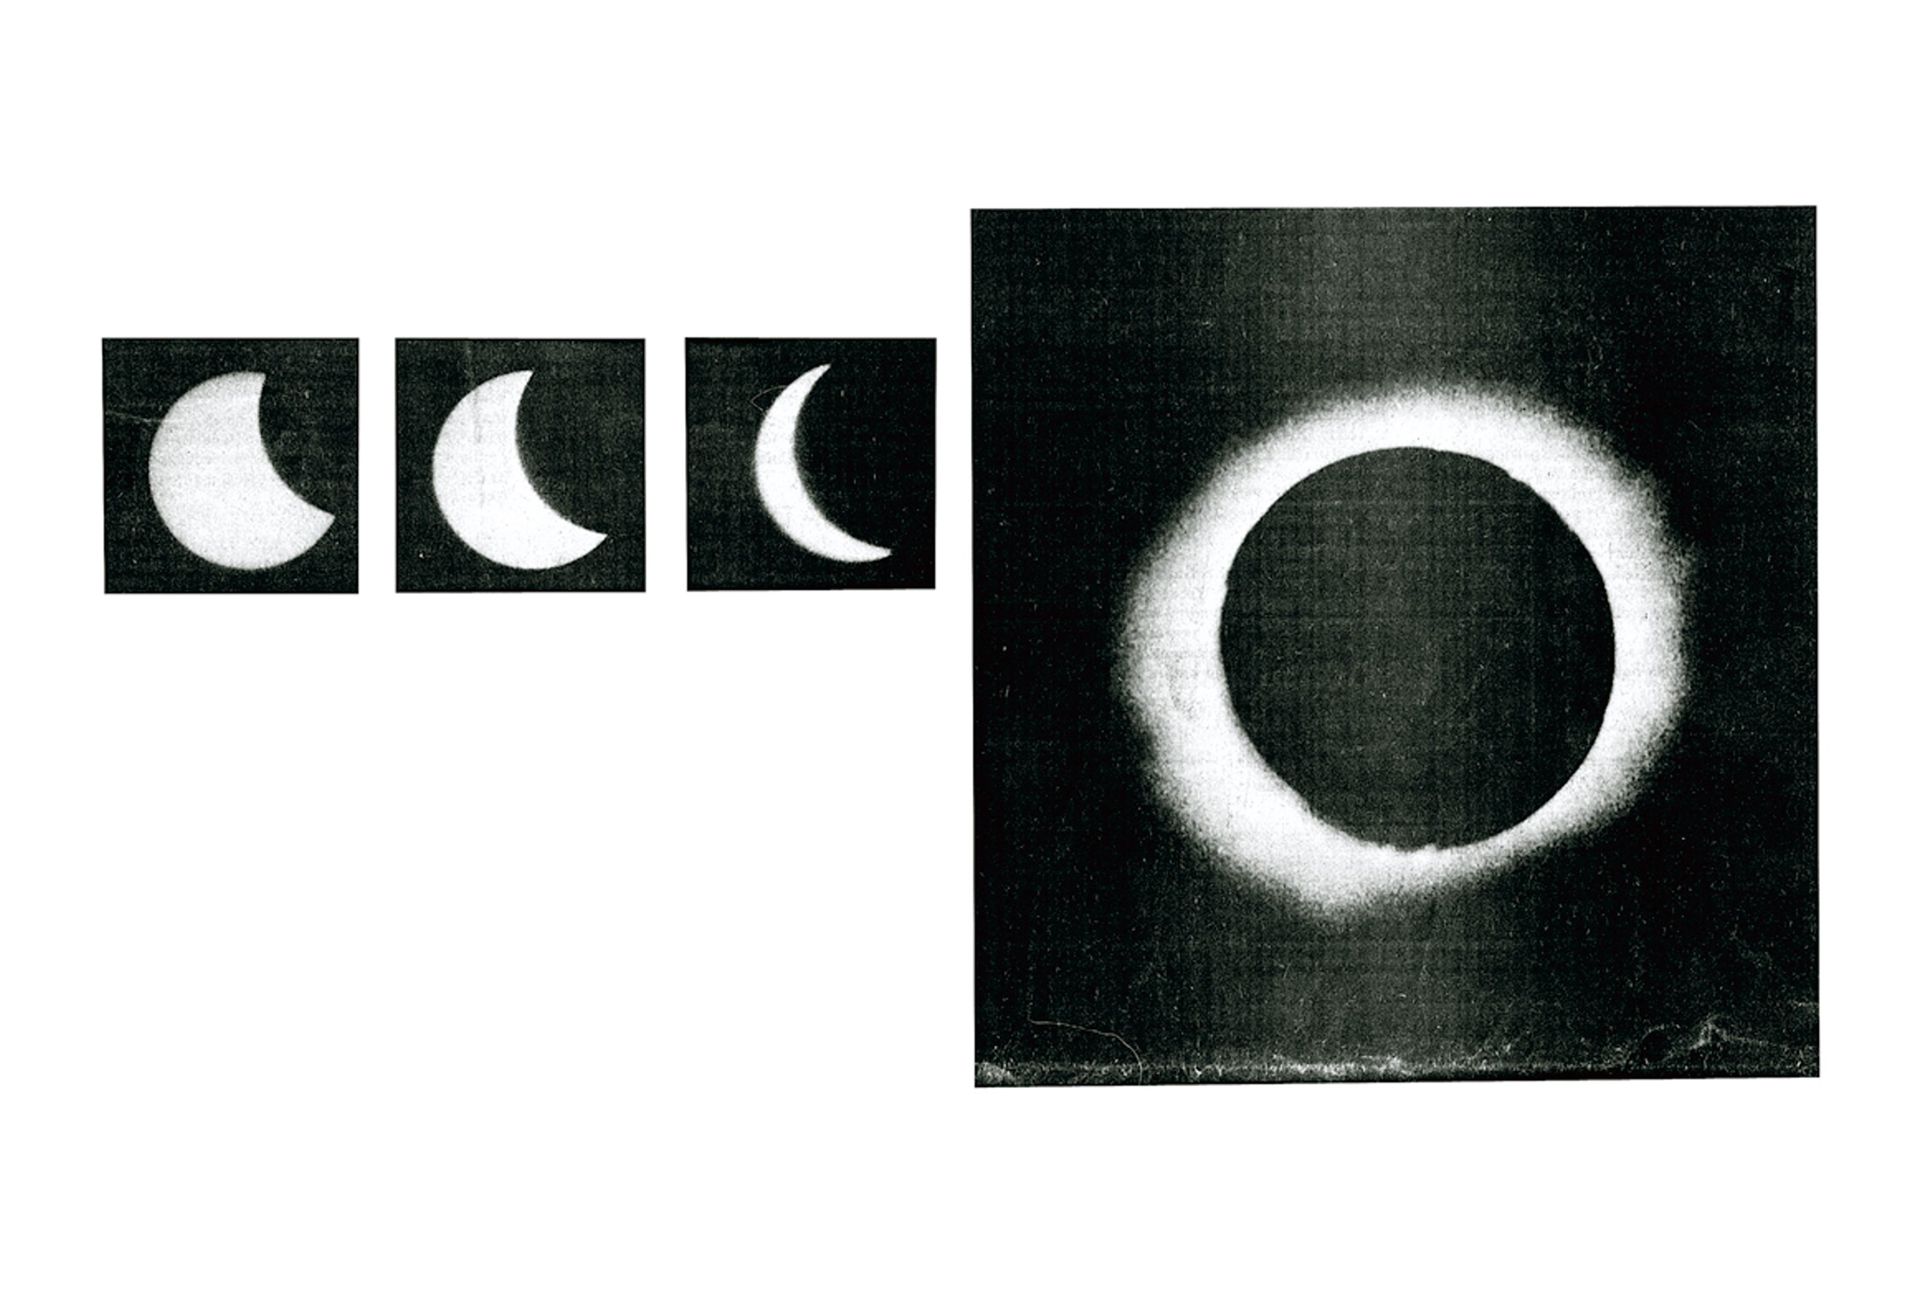 The front page of an old newspaper called "The Yakima Herald", with a collection of eclipse photographs above the fold, and blank white space below it.